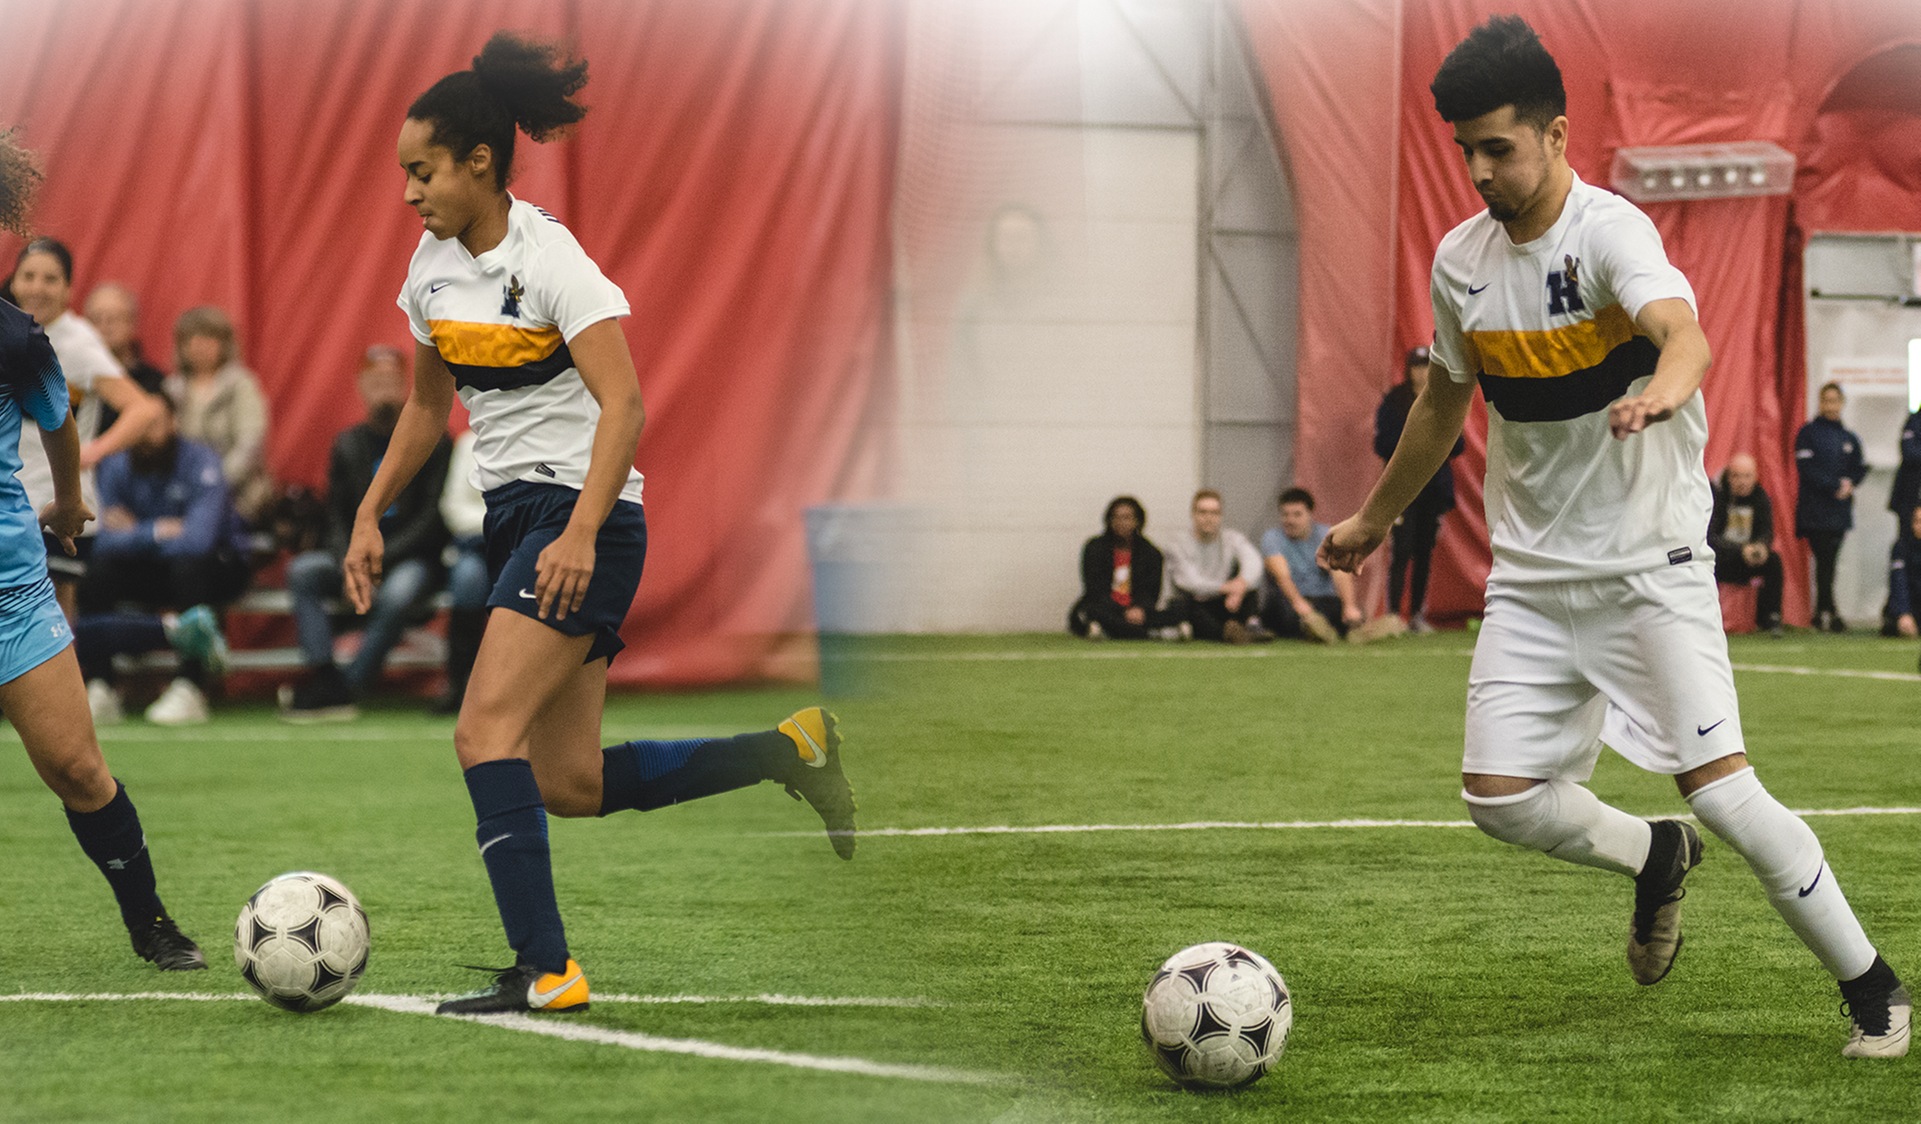 HUMBER INDOOR SOCCER ANNOUNCES OPEN TRYOUT DATES